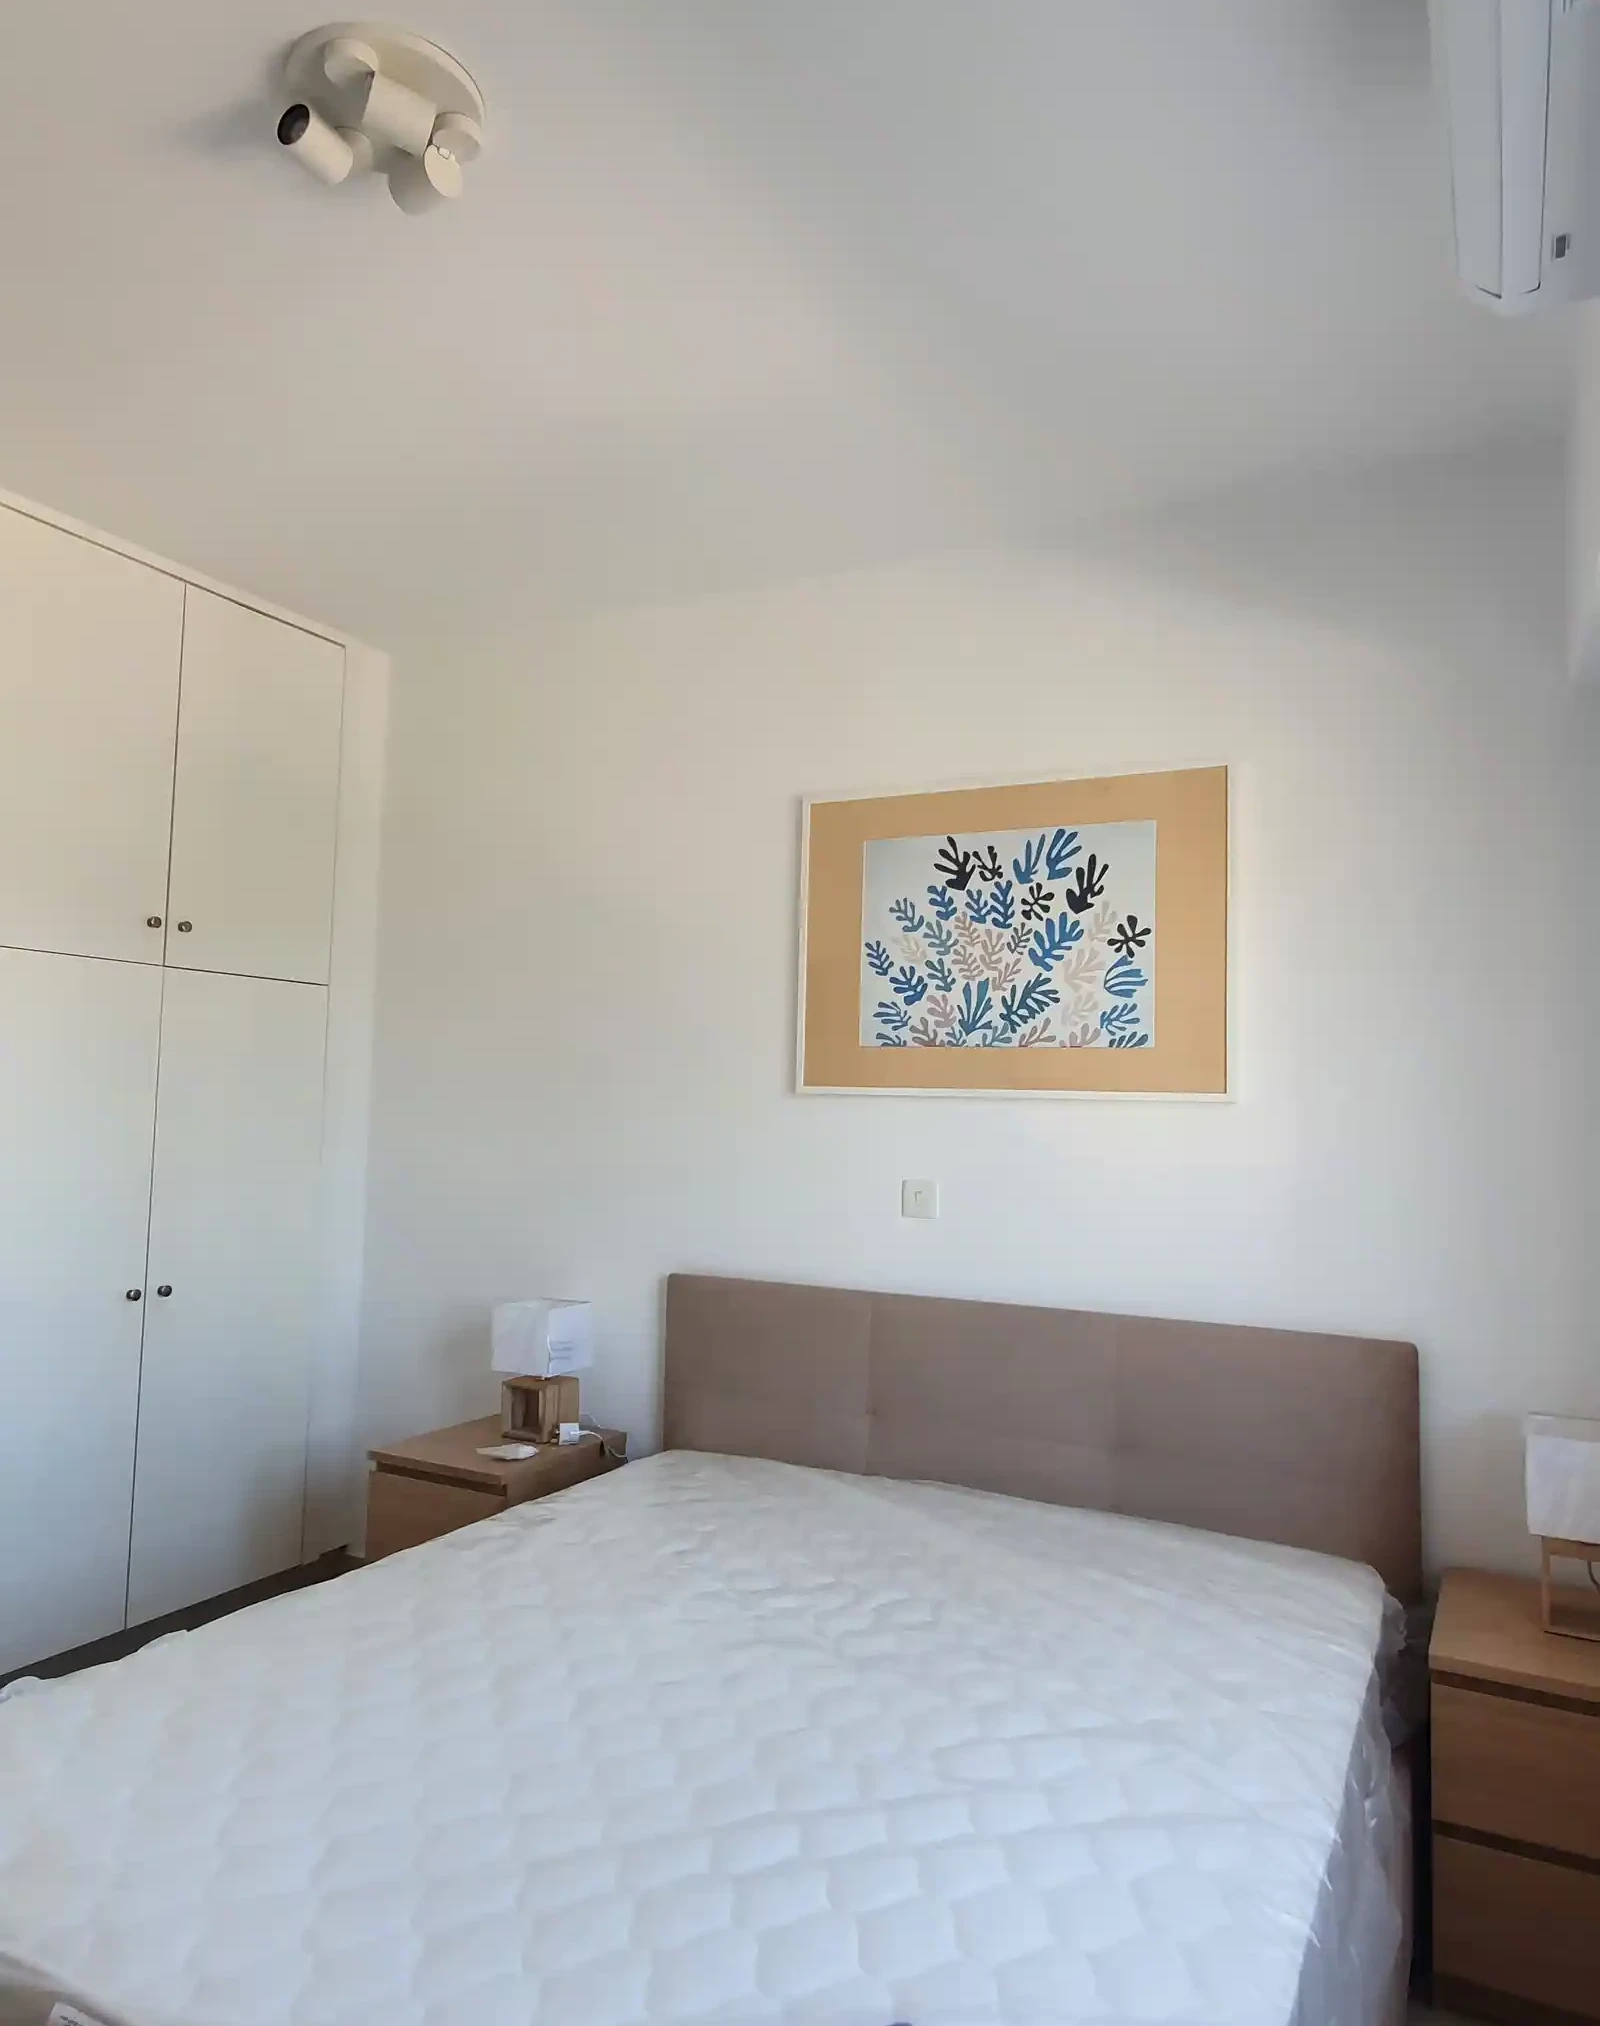 2-bedroom apartment to rent €1.300, image 1